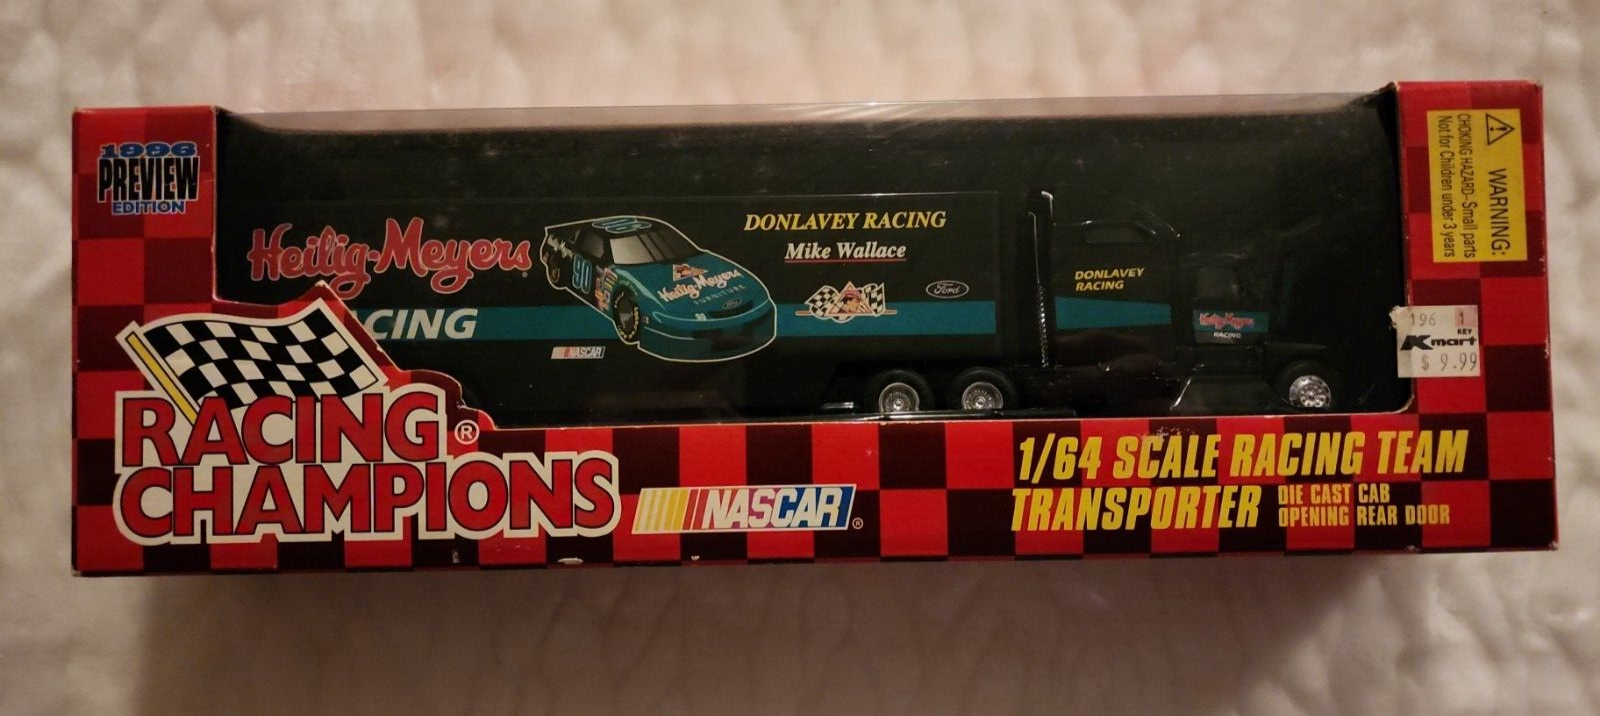 Primary image for Mike Wallace #90 NASCAR Racing Champions 1:64 Scale Team Transporter 1996 Ed.